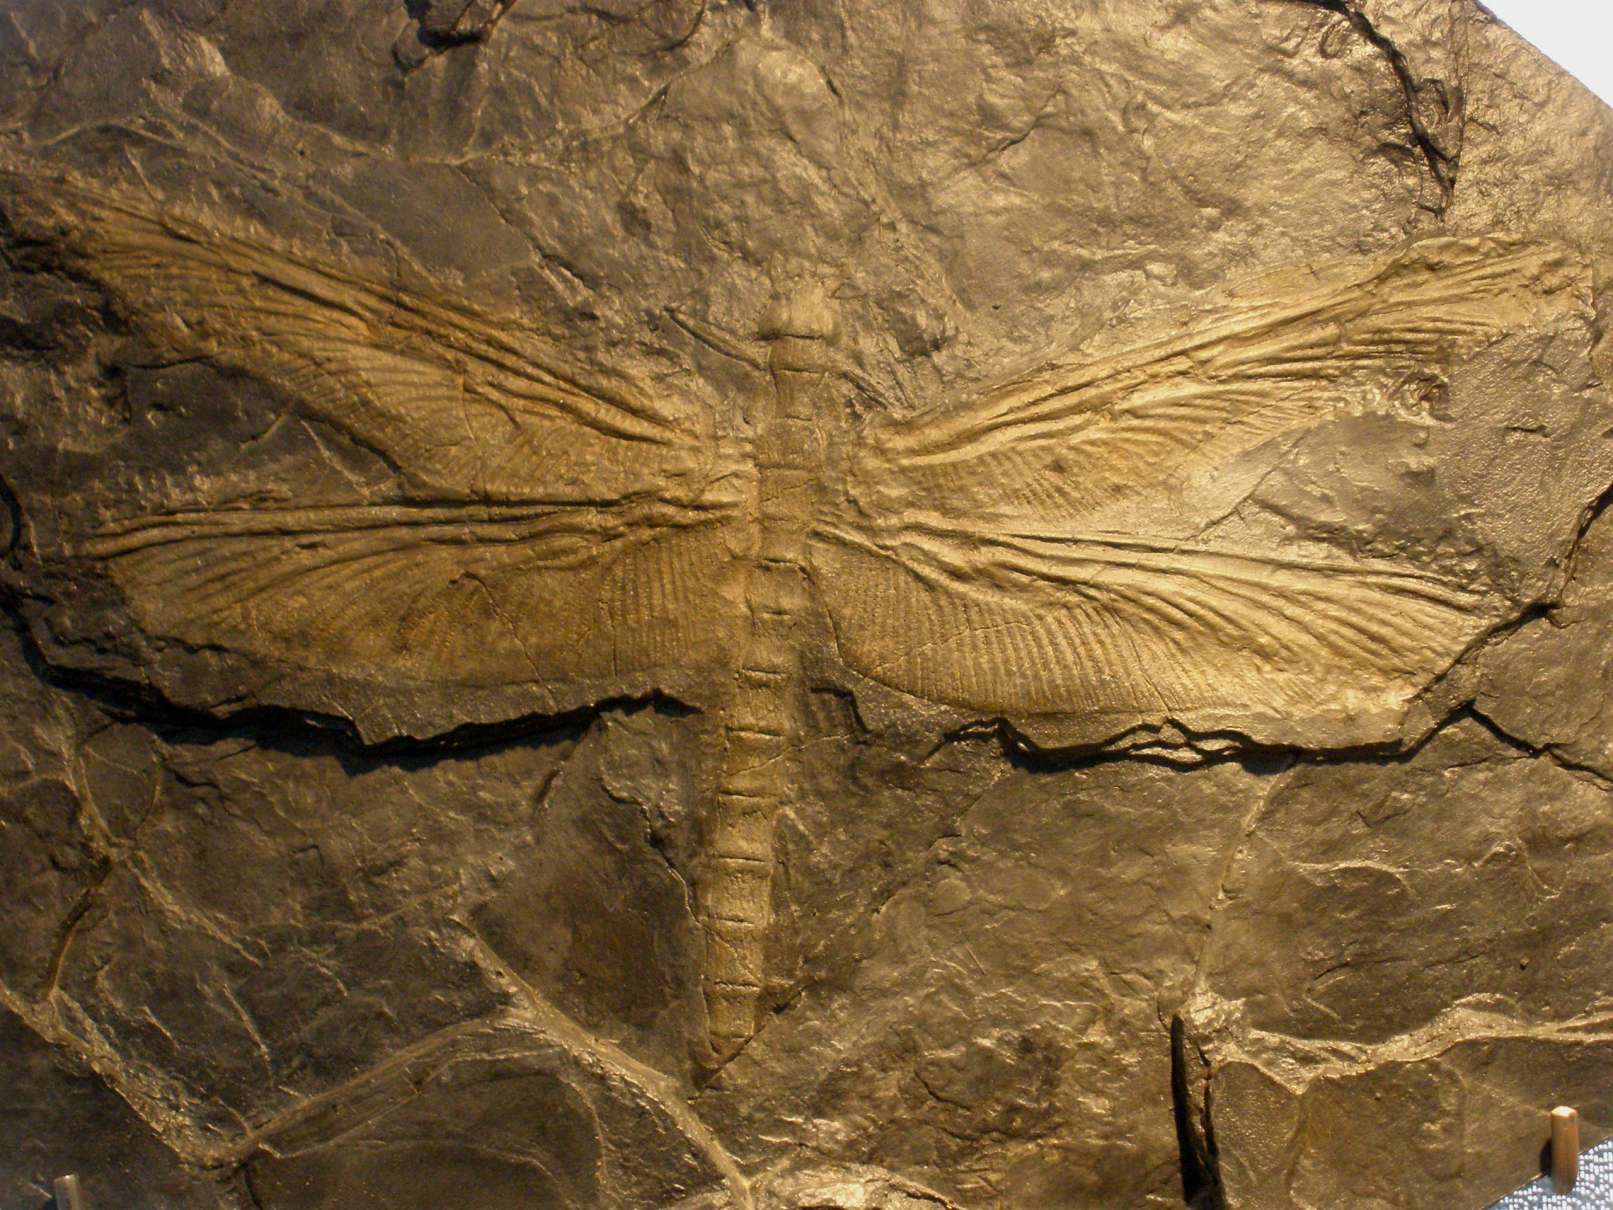 The largest insect ever existed was a giant 'dragonfly' 1